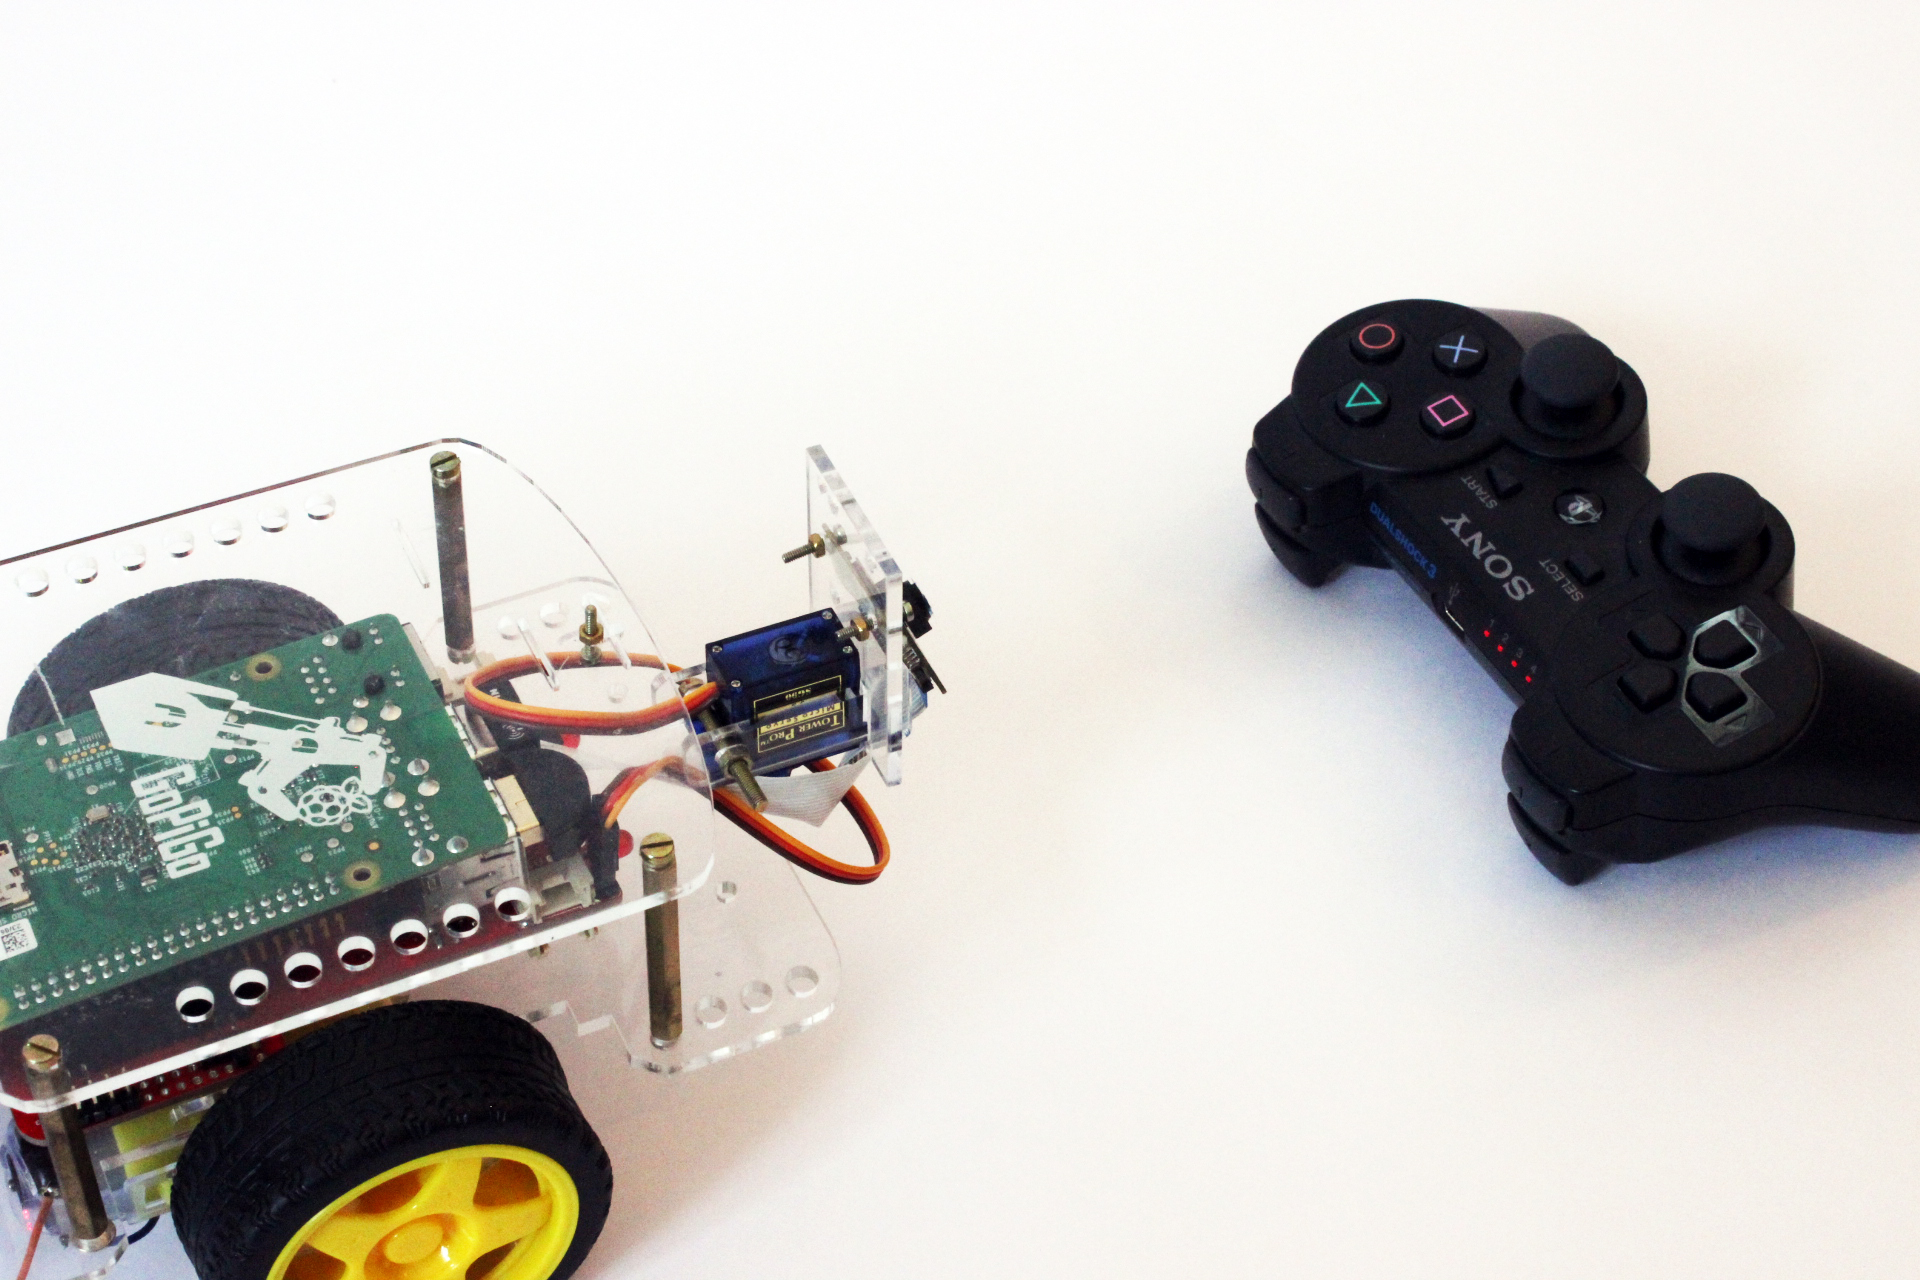 PS3 controller and Raspberry Pi robot These Raspberry Pi projects are simple projects that bring robotics to everyone!.